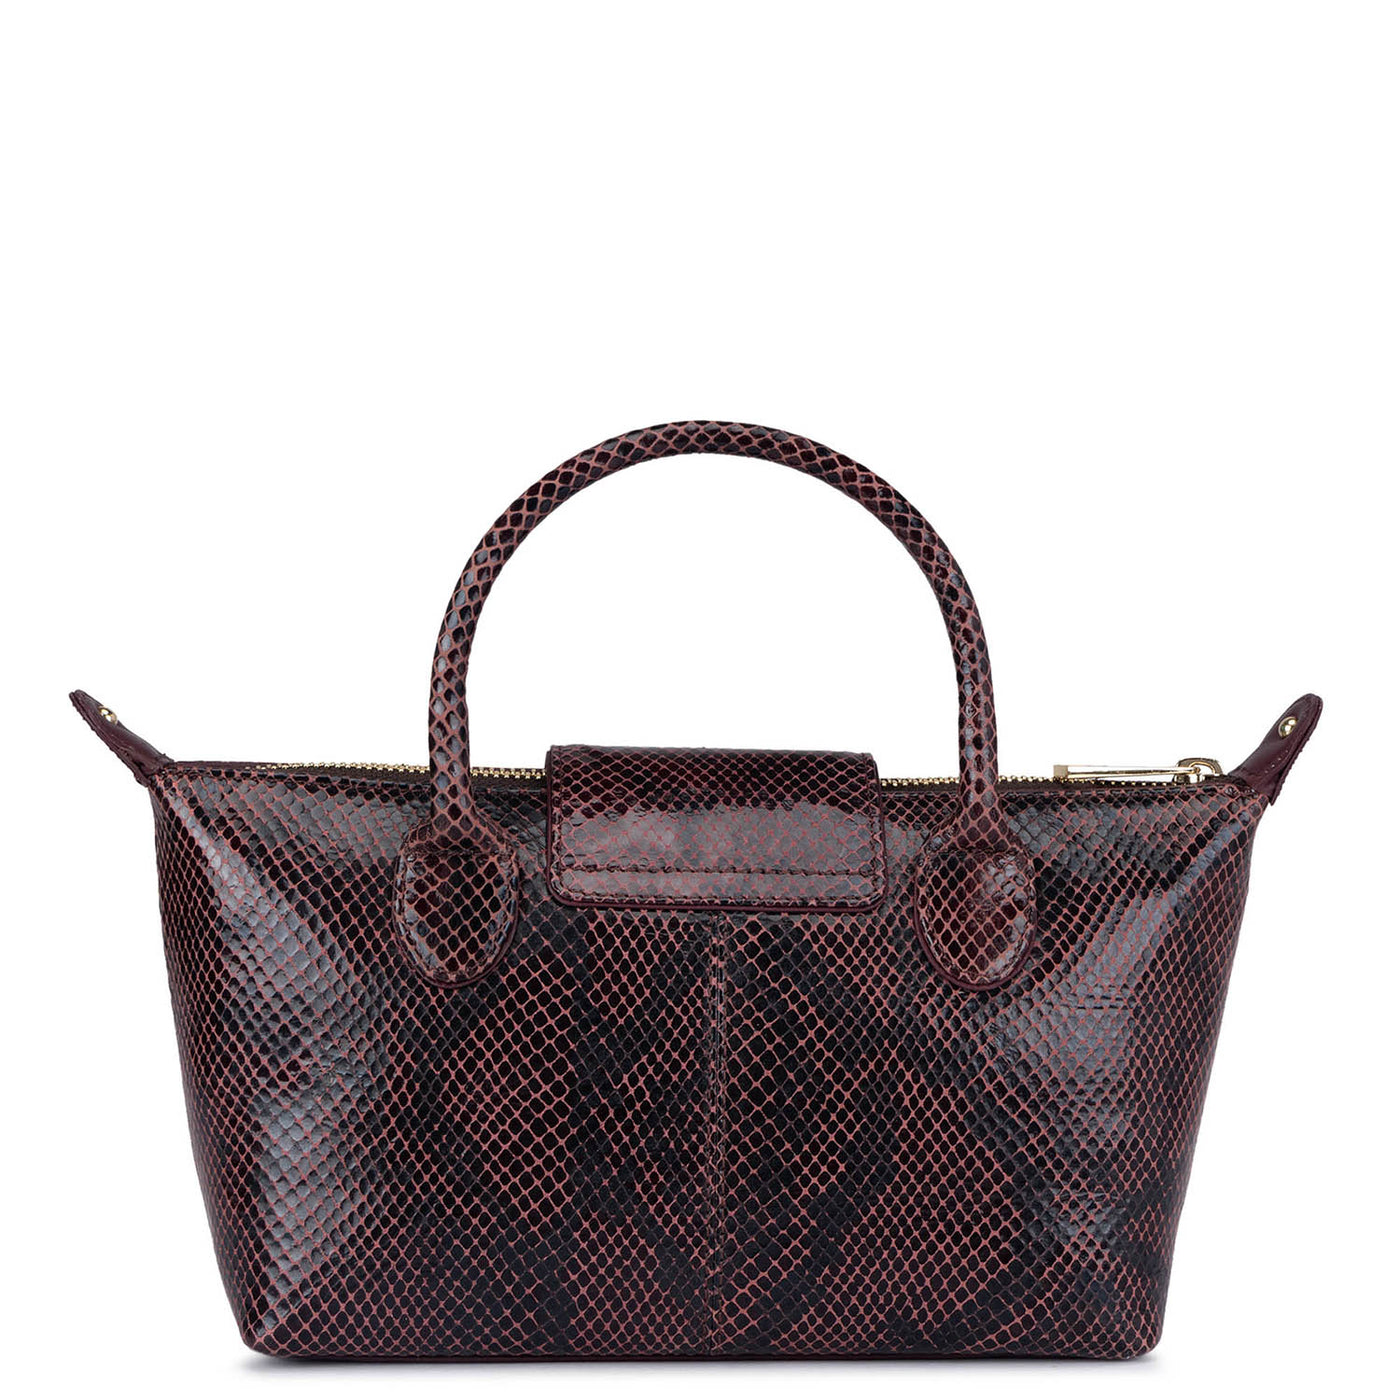 Snake Leather Vanity Pouch - Berry